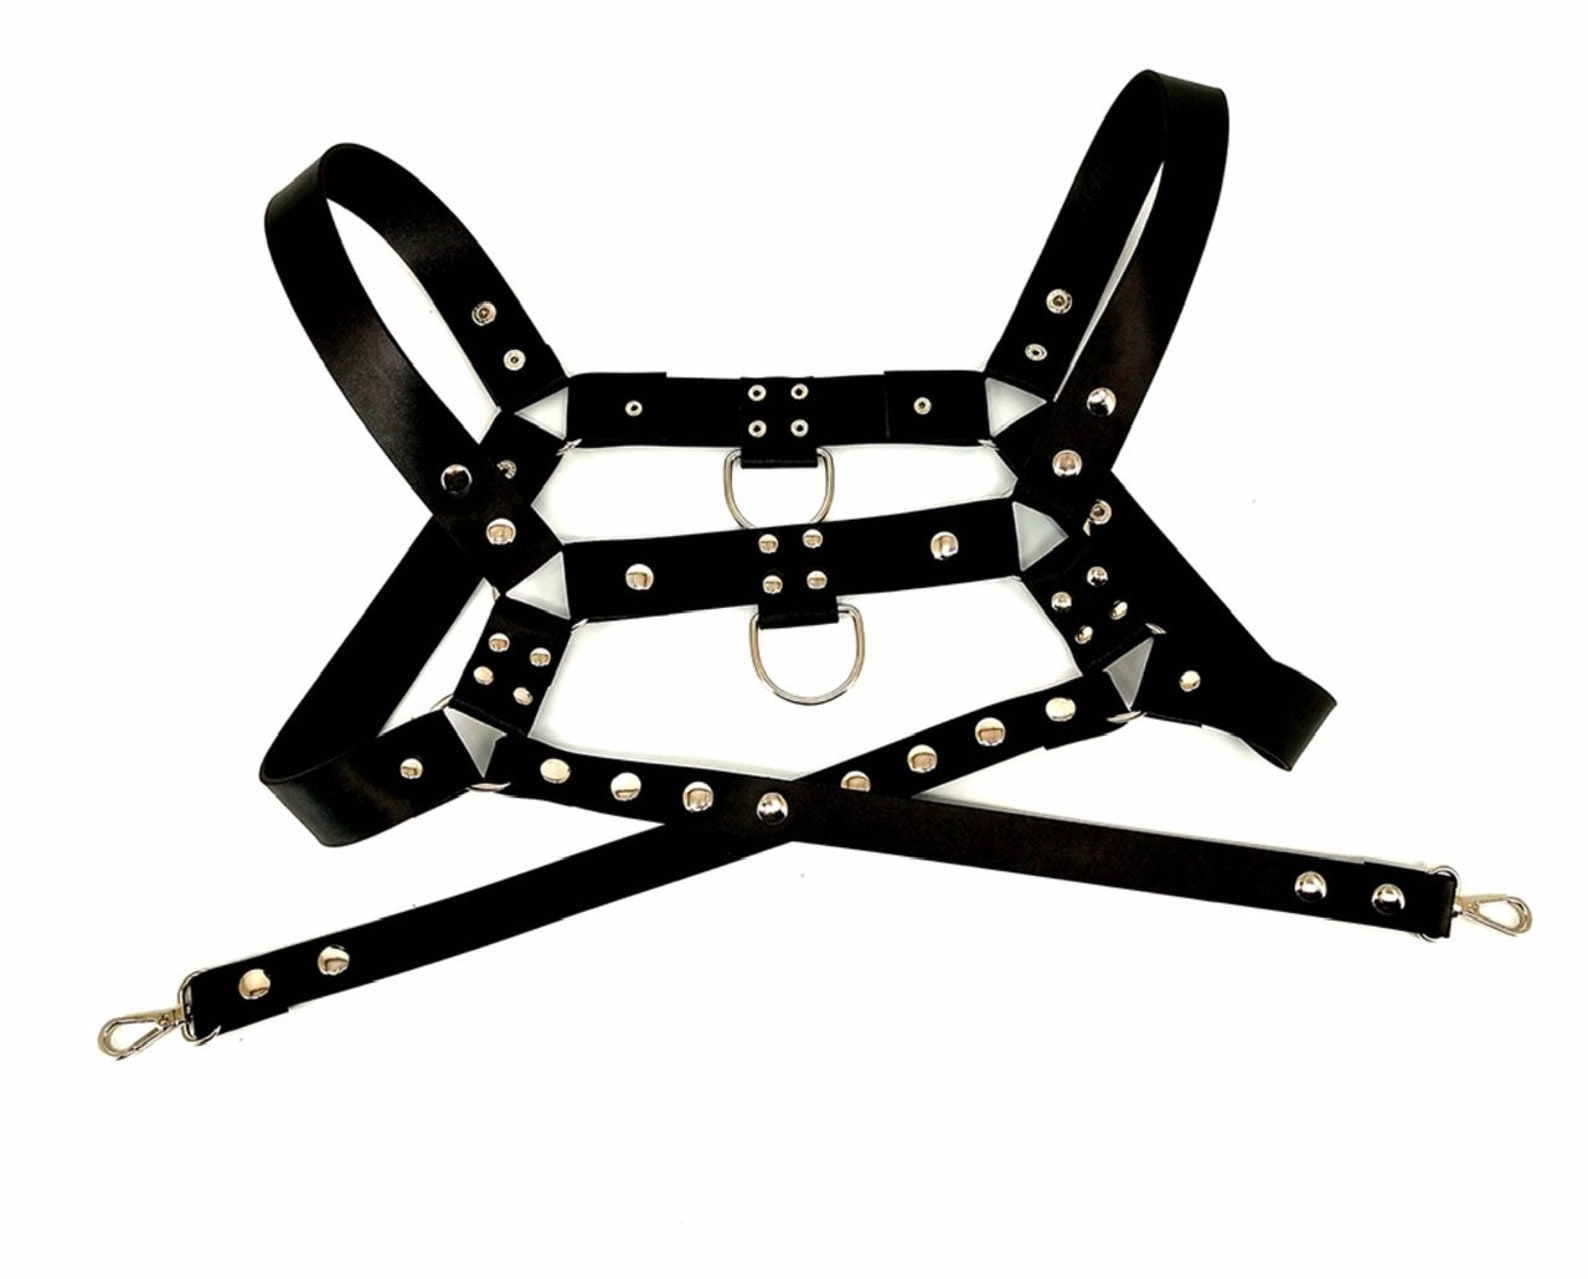 Men Rave Gear Faux Leather Club Harness Adjustable Sexual Body | Etsy